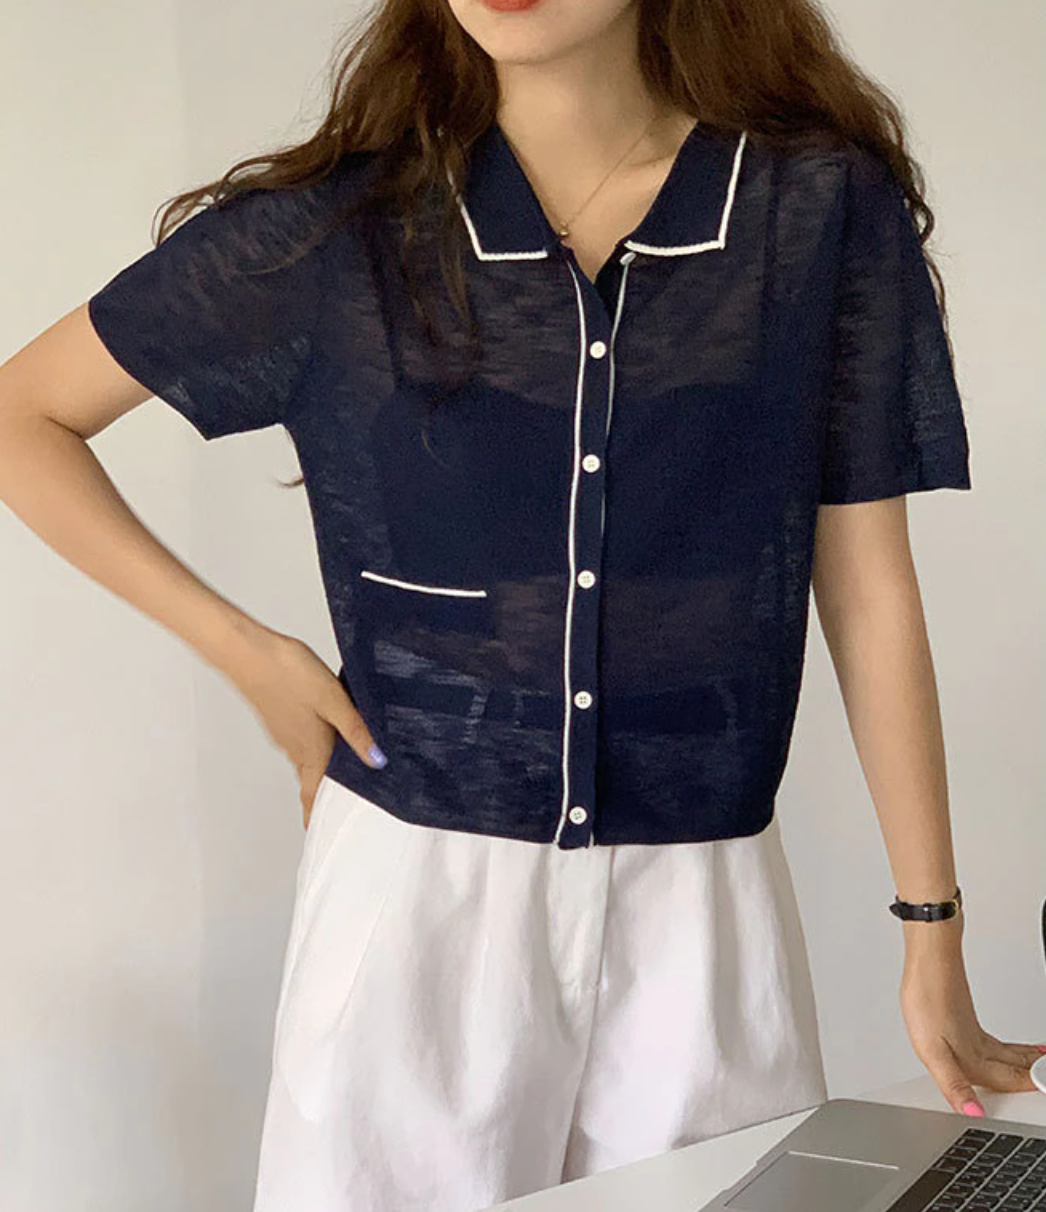 [Korean Style] Collared Contrast Pipping Summer Knit Top Cardigan